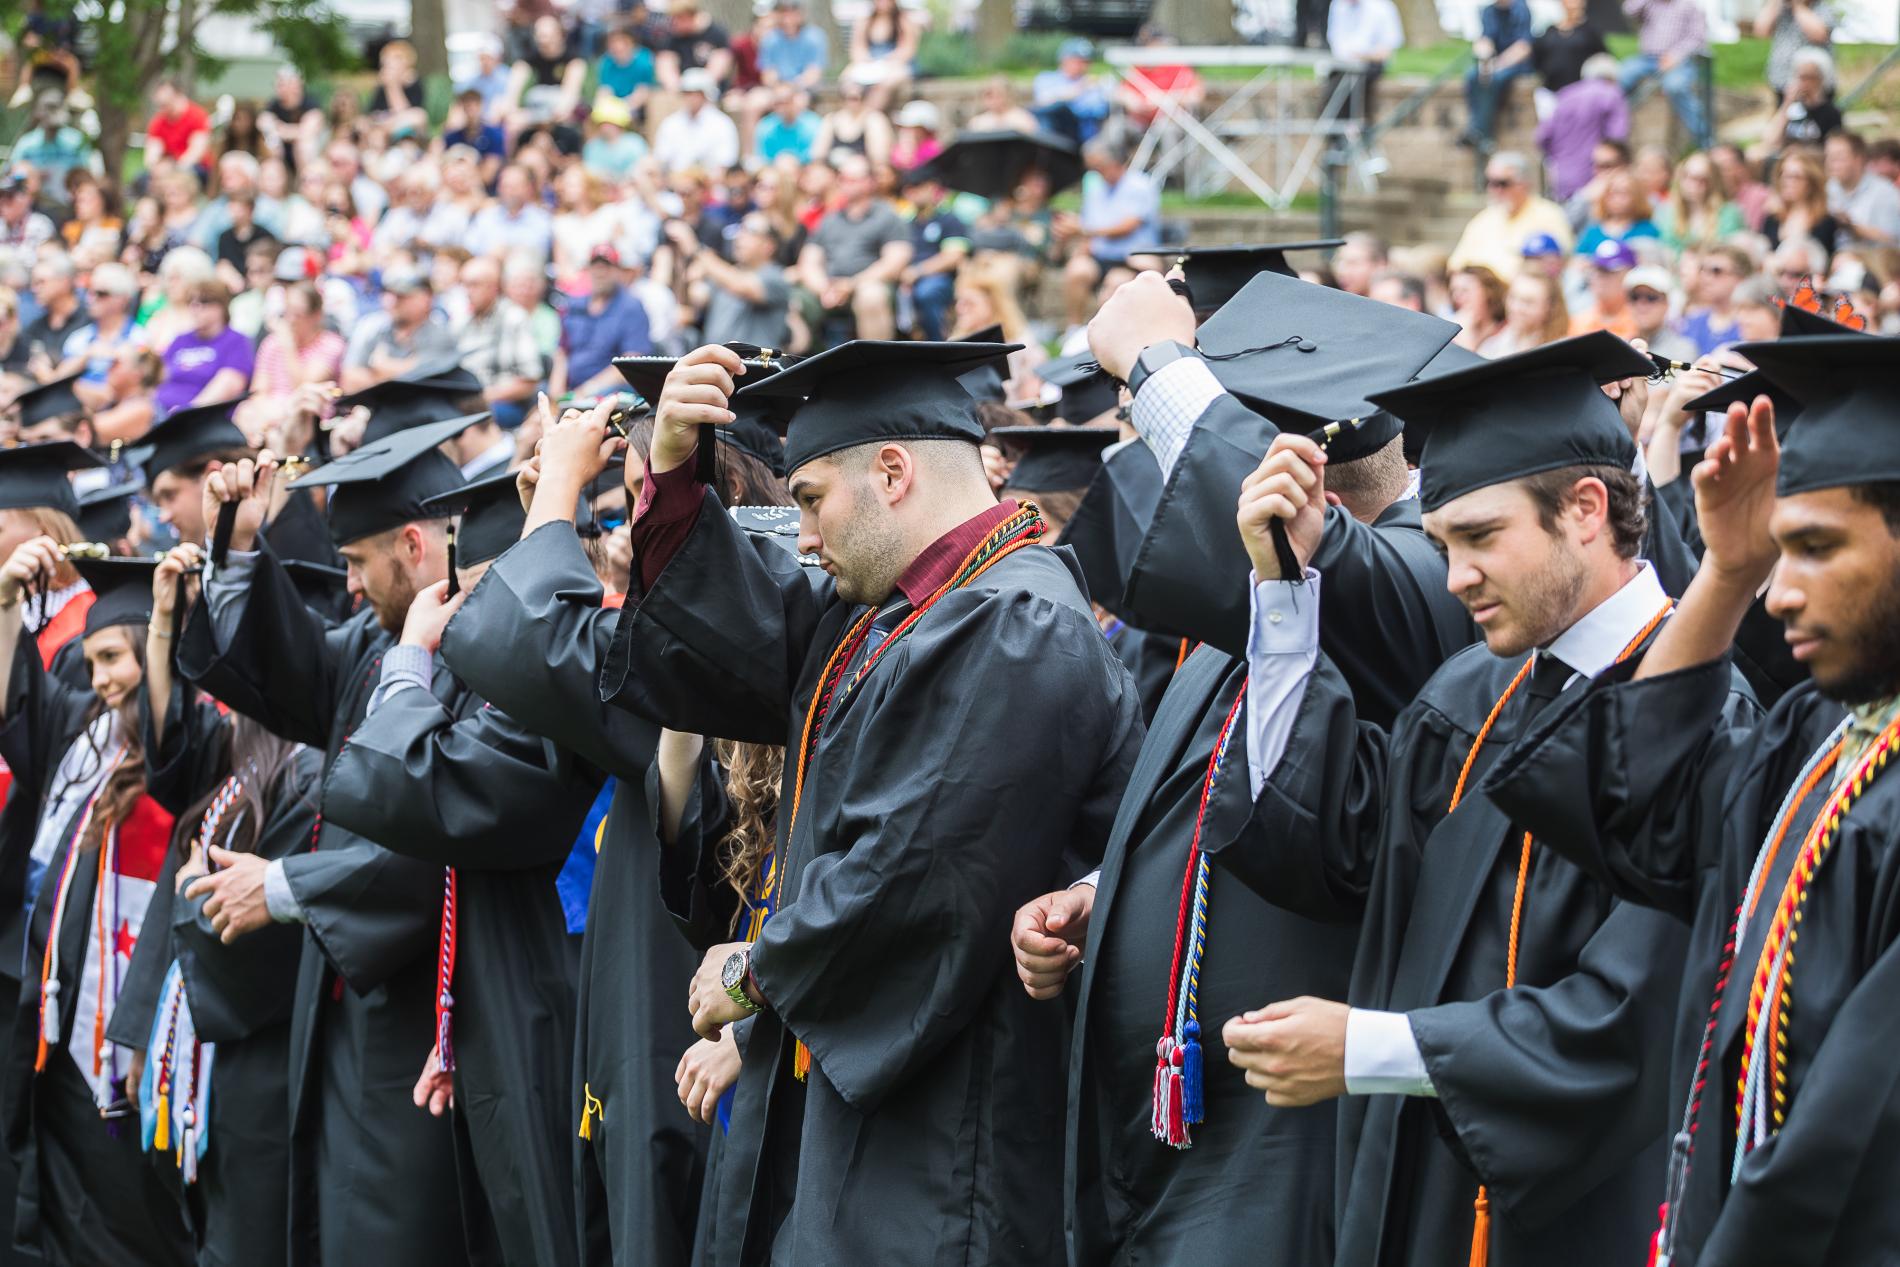 A row of Doane graduates at the spring 2023 afternoon commencement ceremony, clad in black gowns and black caps with bright sashes and cords, turn their tassels to signify receiving their degrees. Blurred in the background are their families and friends seated in Cassel Theatre, a green, grassy amphitheater that rises around the graduates. 